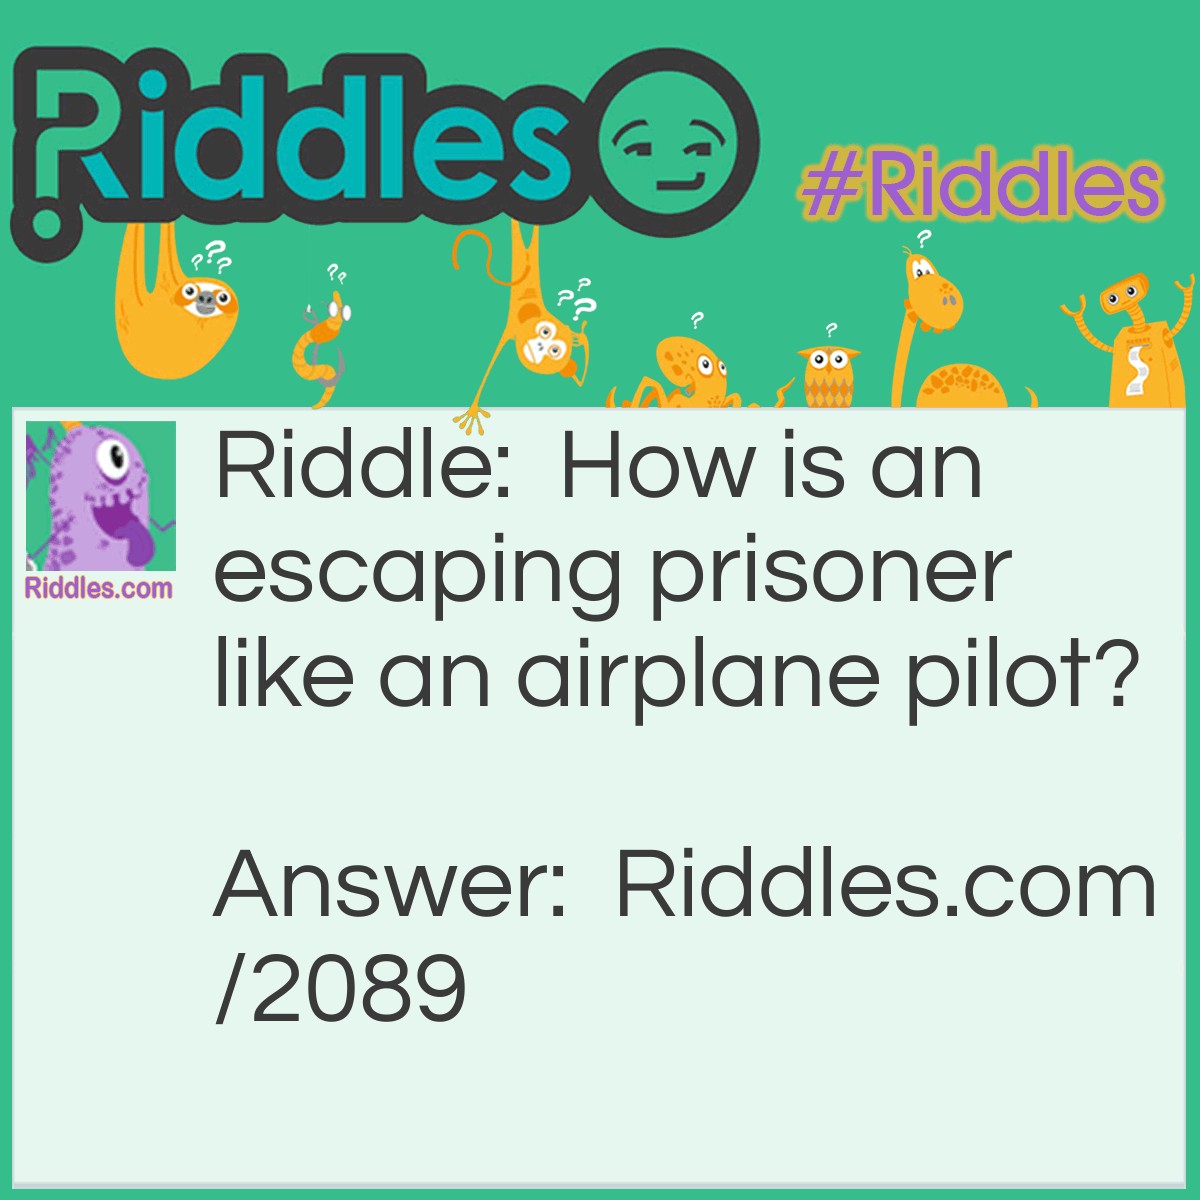 Riddle: How is an escaping prisoner like an airplane pilot? Answer: Both want safe flights.